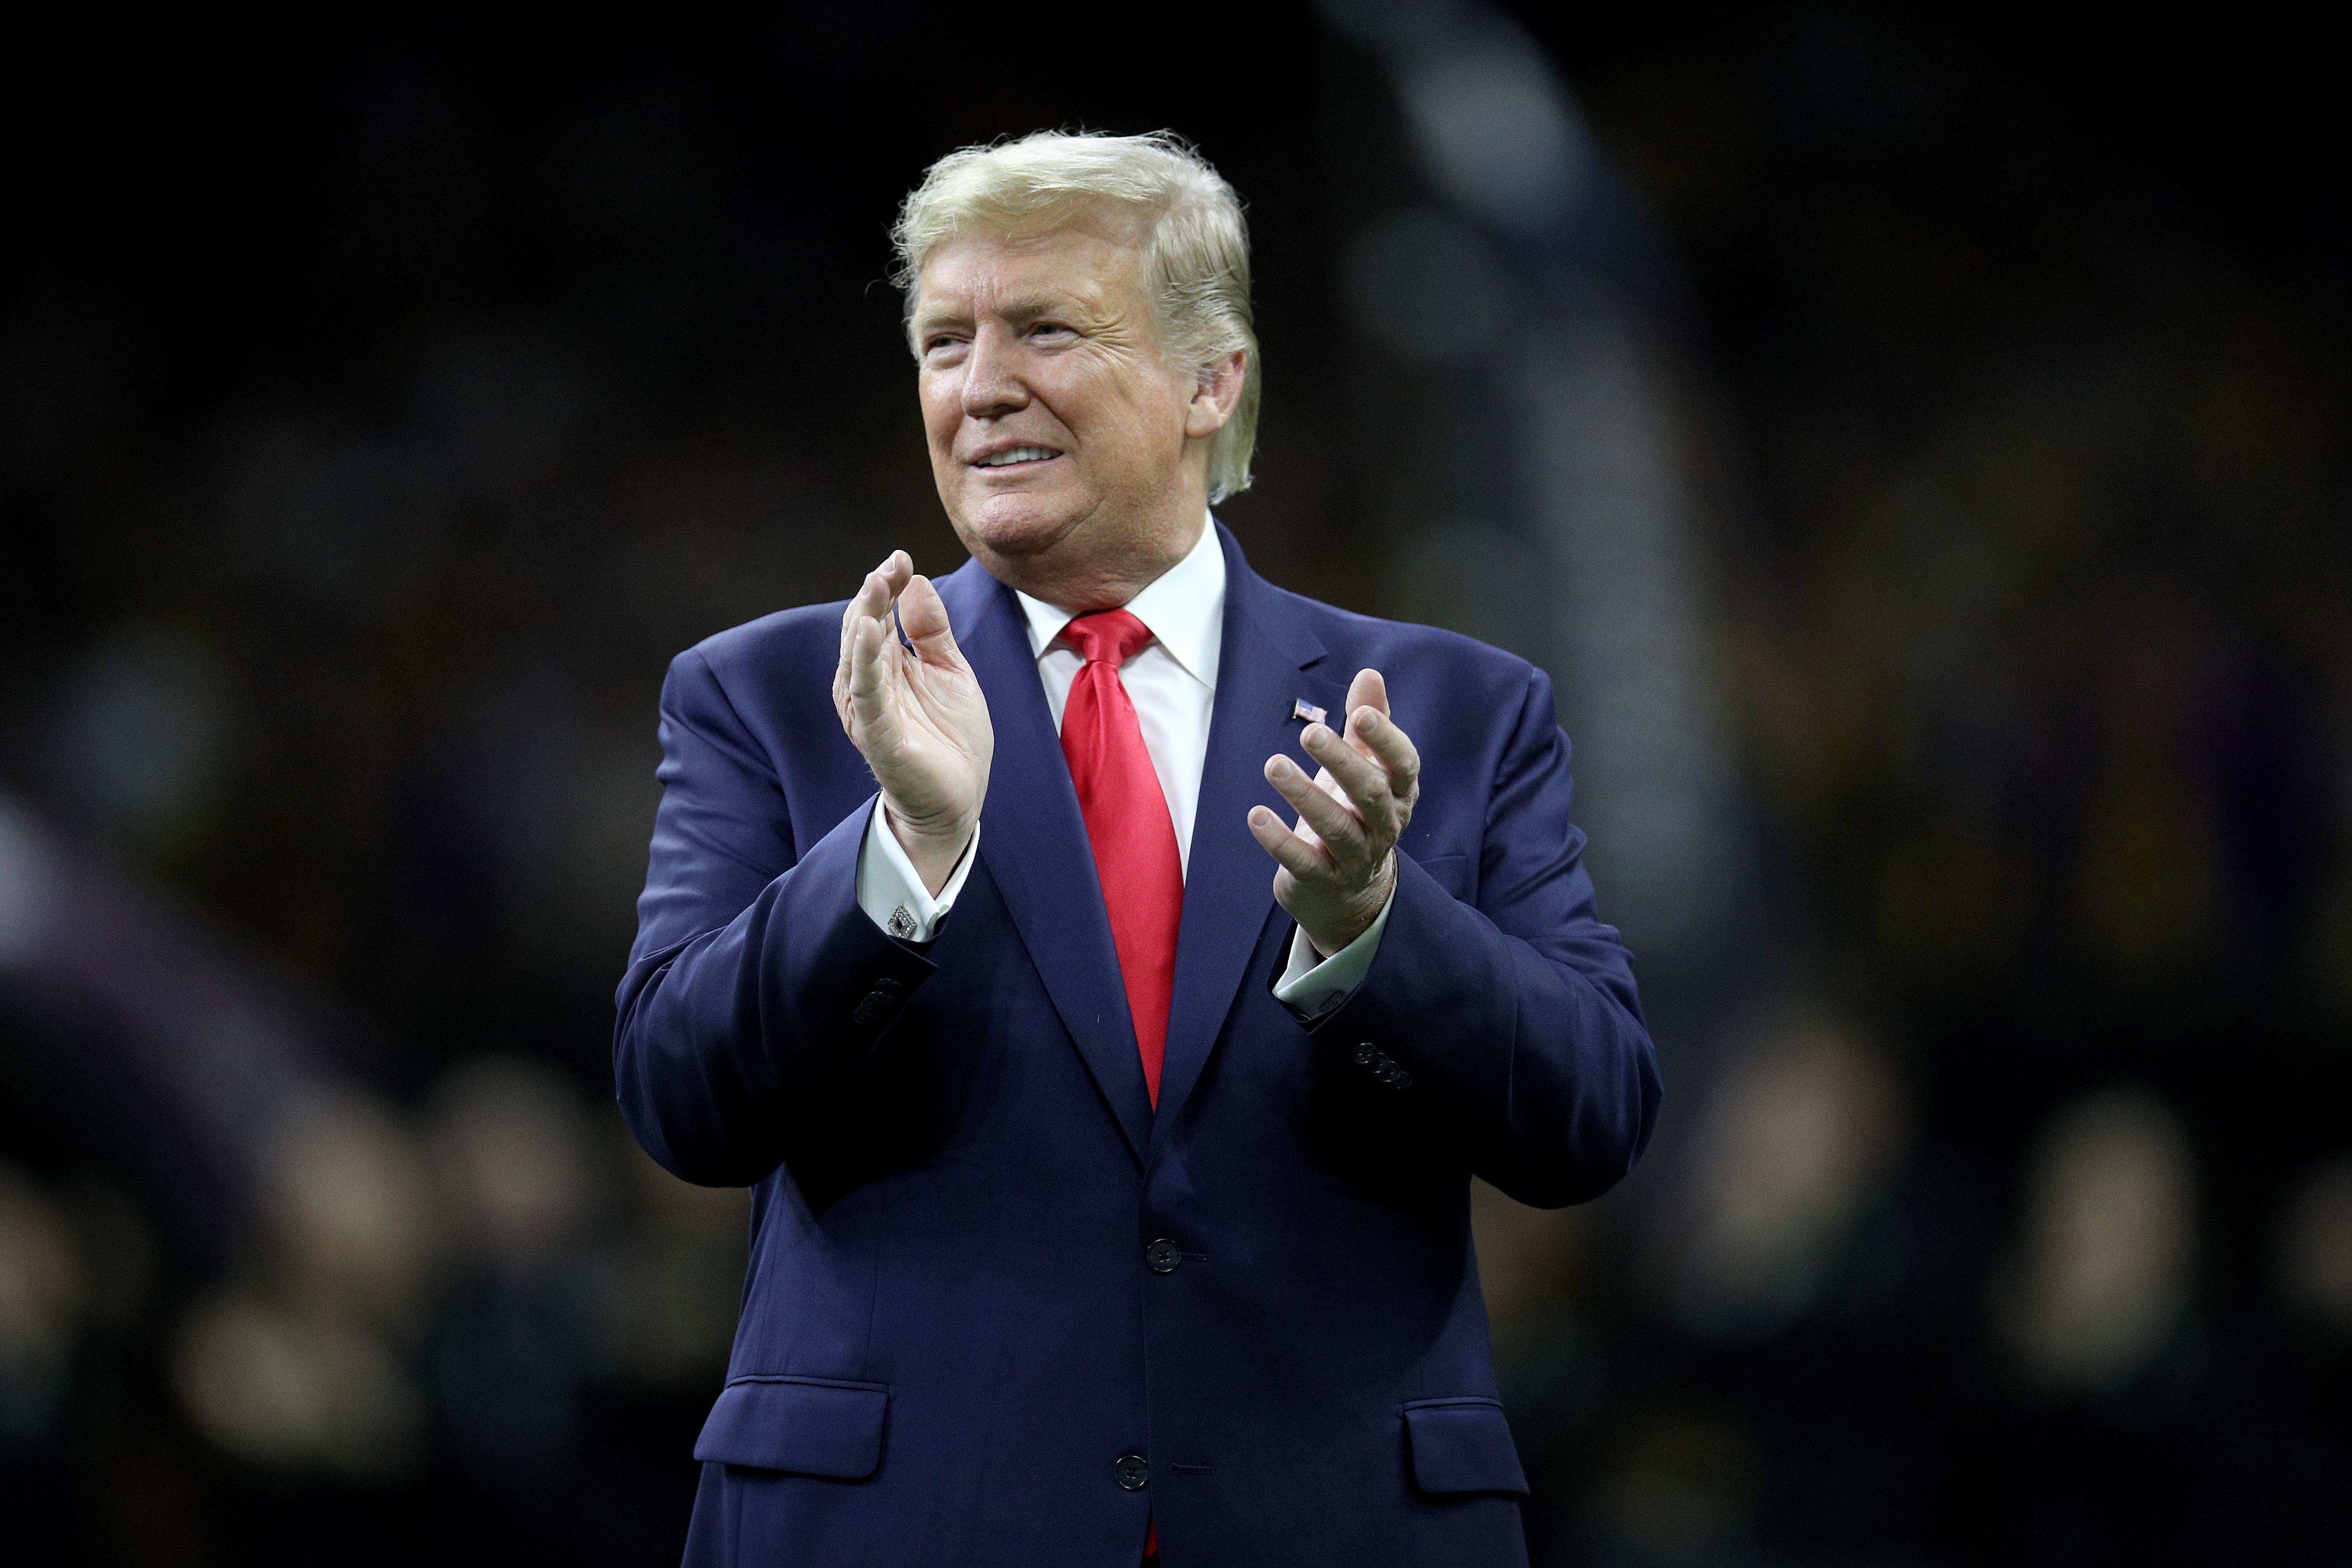 U.S. President Donald Trump claps prior to the College Football Playoff National Championship game between the Clemson Tigers and the LSU Tigers at Mercedes Benz Superdome on January 13, 2020 in New Orleans, Louisiana. (Chris Graythen/Getty Images)